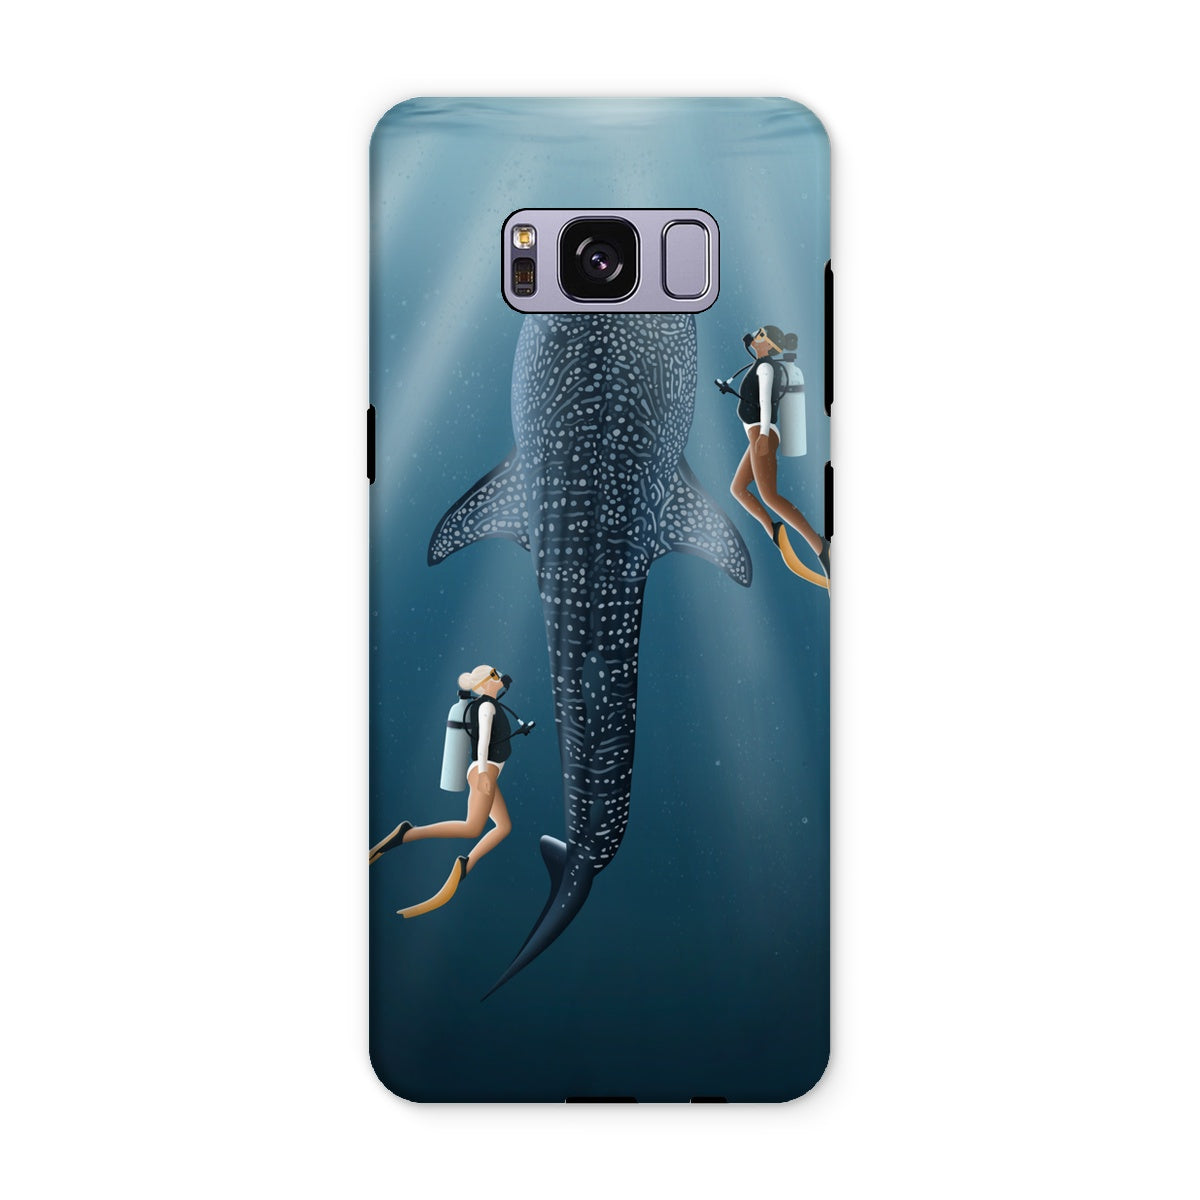 Scuba diving with friends reinforced phone case